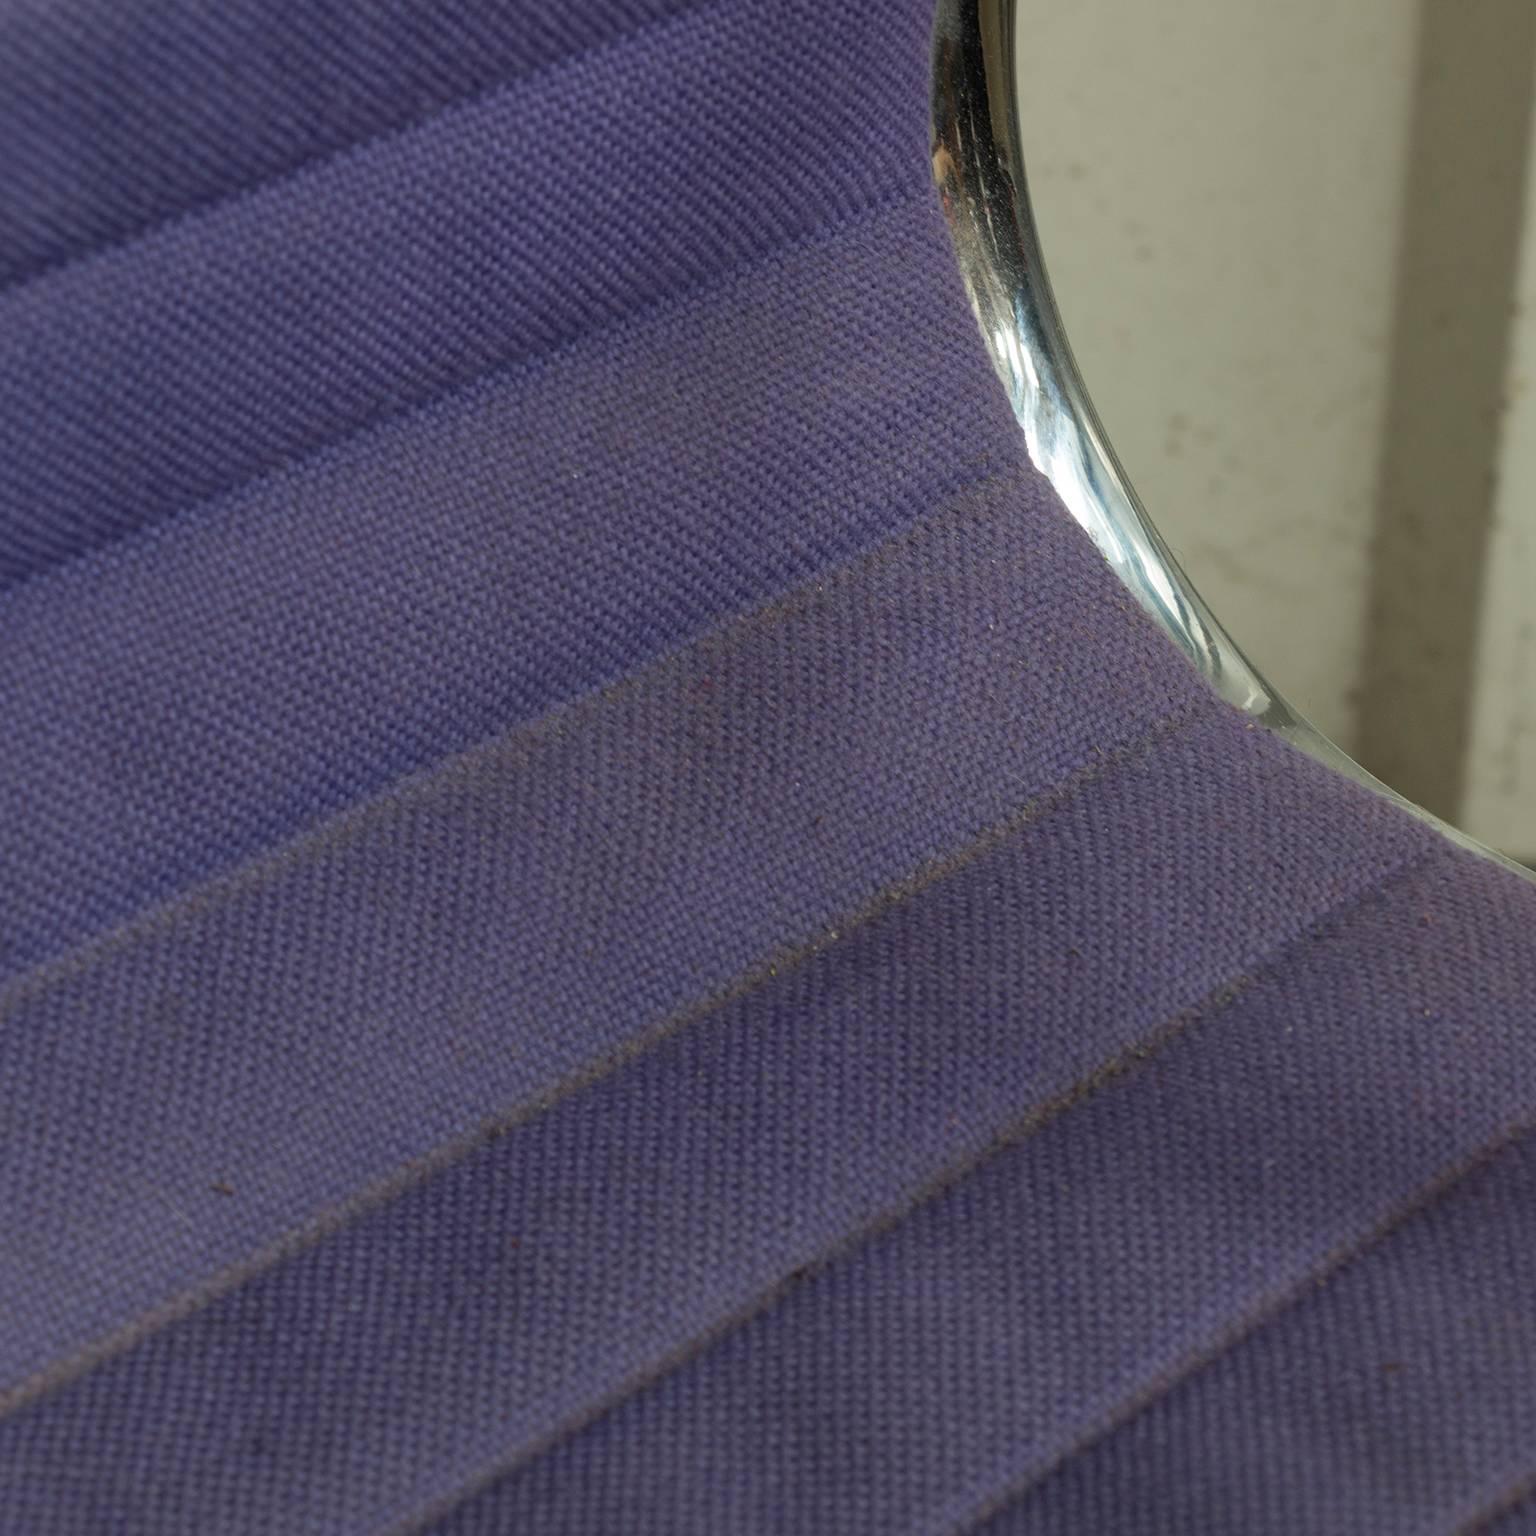 Aluminum 1958, Ray and Charles Eames Purple Adjustable Tilt Office Chair with Five Wheels